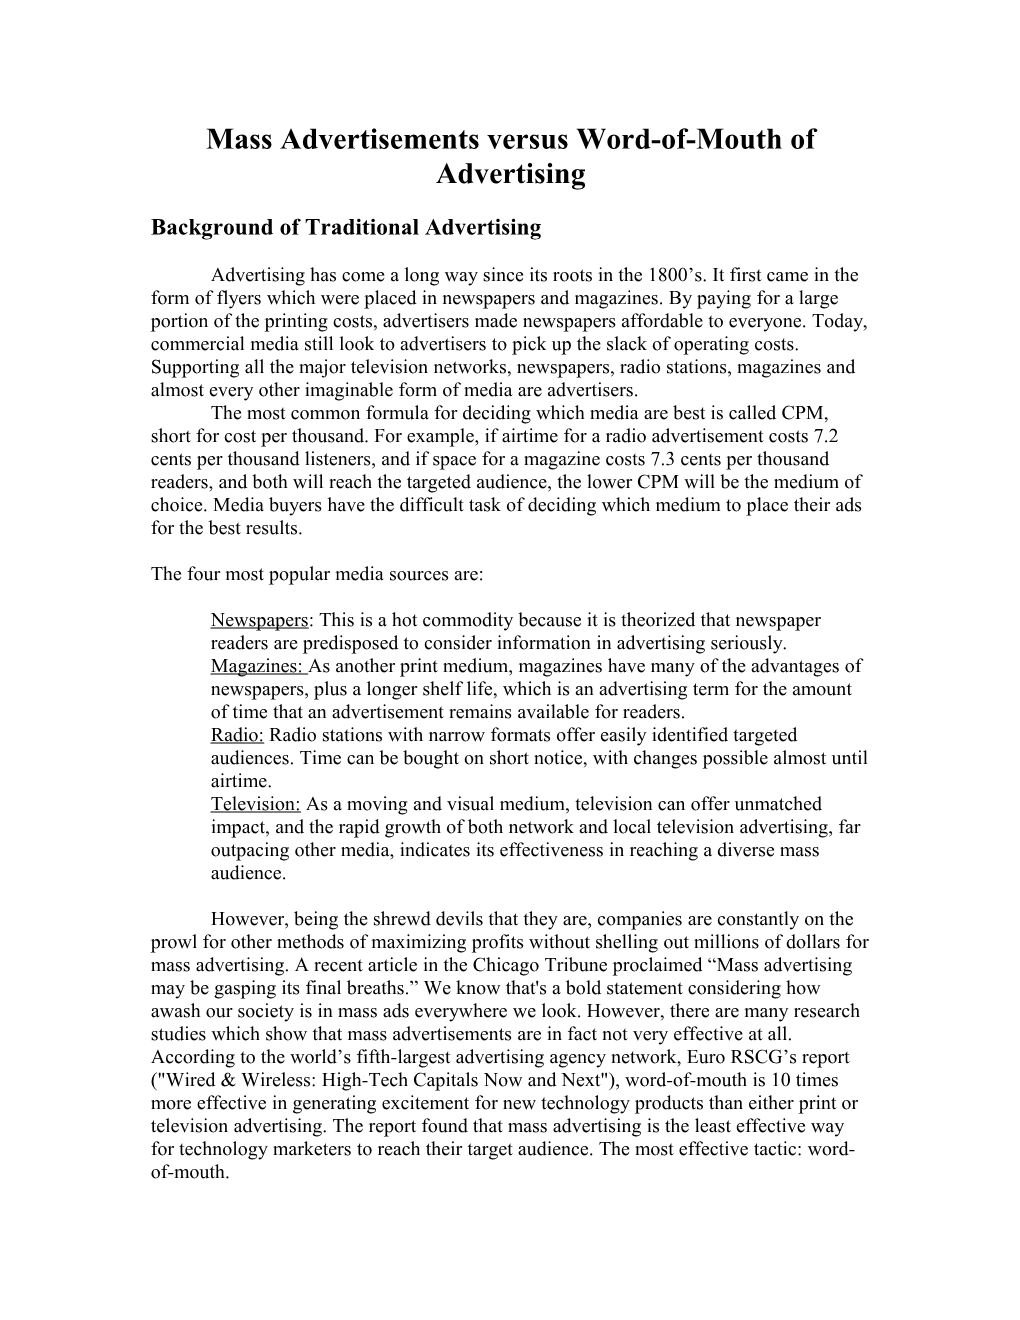 Mass Advertisements Versus Word-Of-Mouth of Advertising